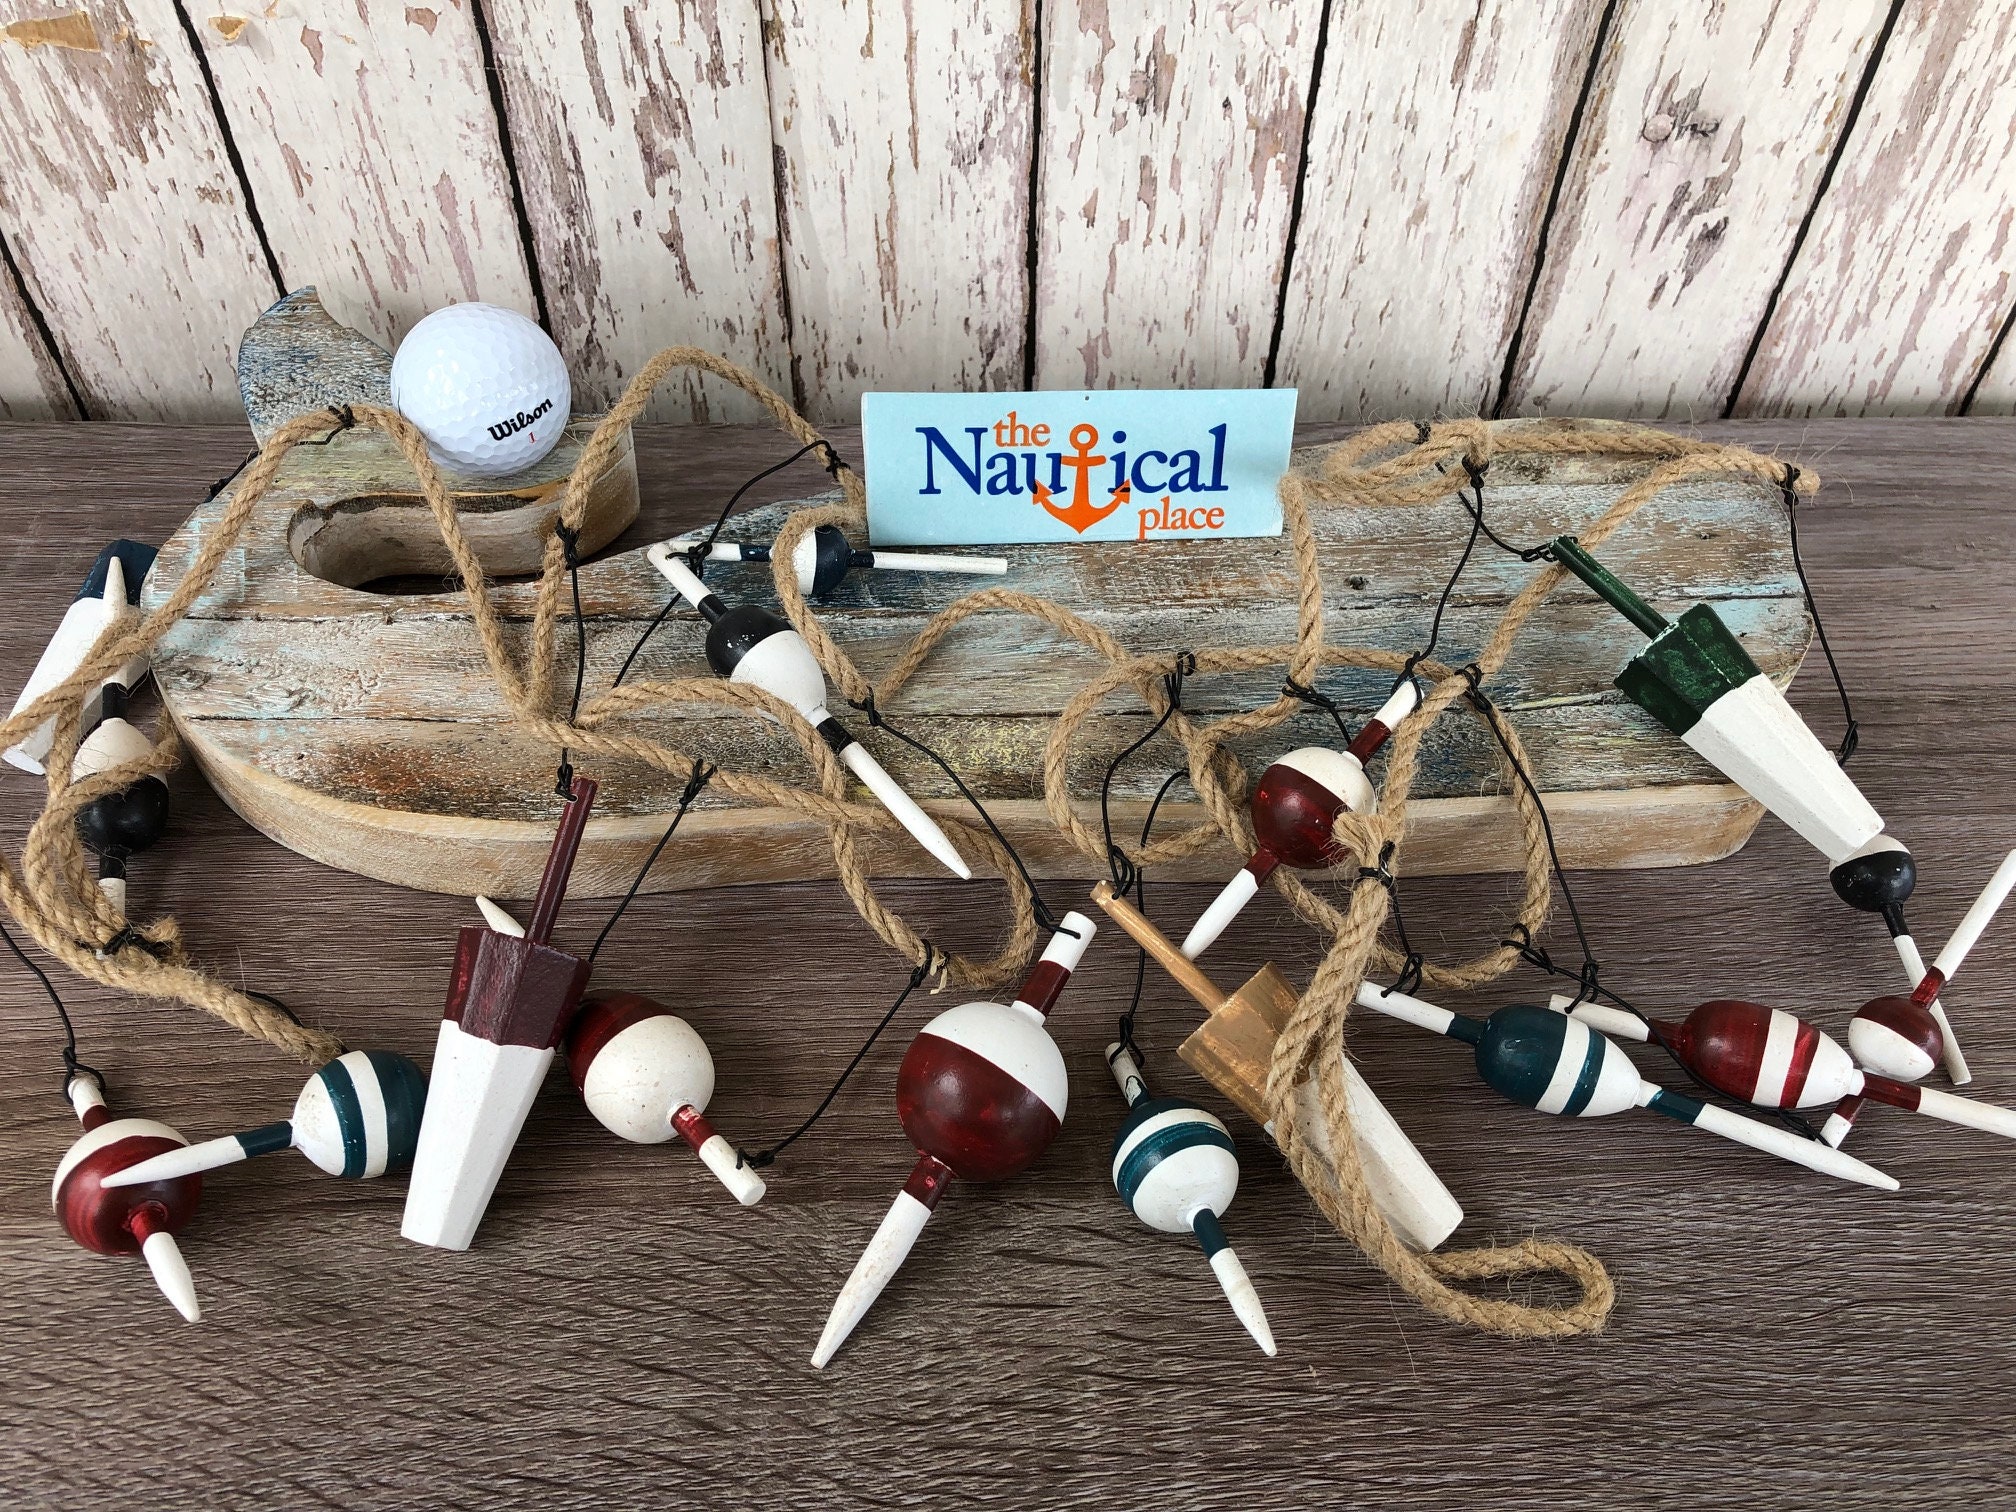 WOOD FISHING NET Floats Lot of 8 Used Wooden Vintage Antique $9.99 -  PicClick